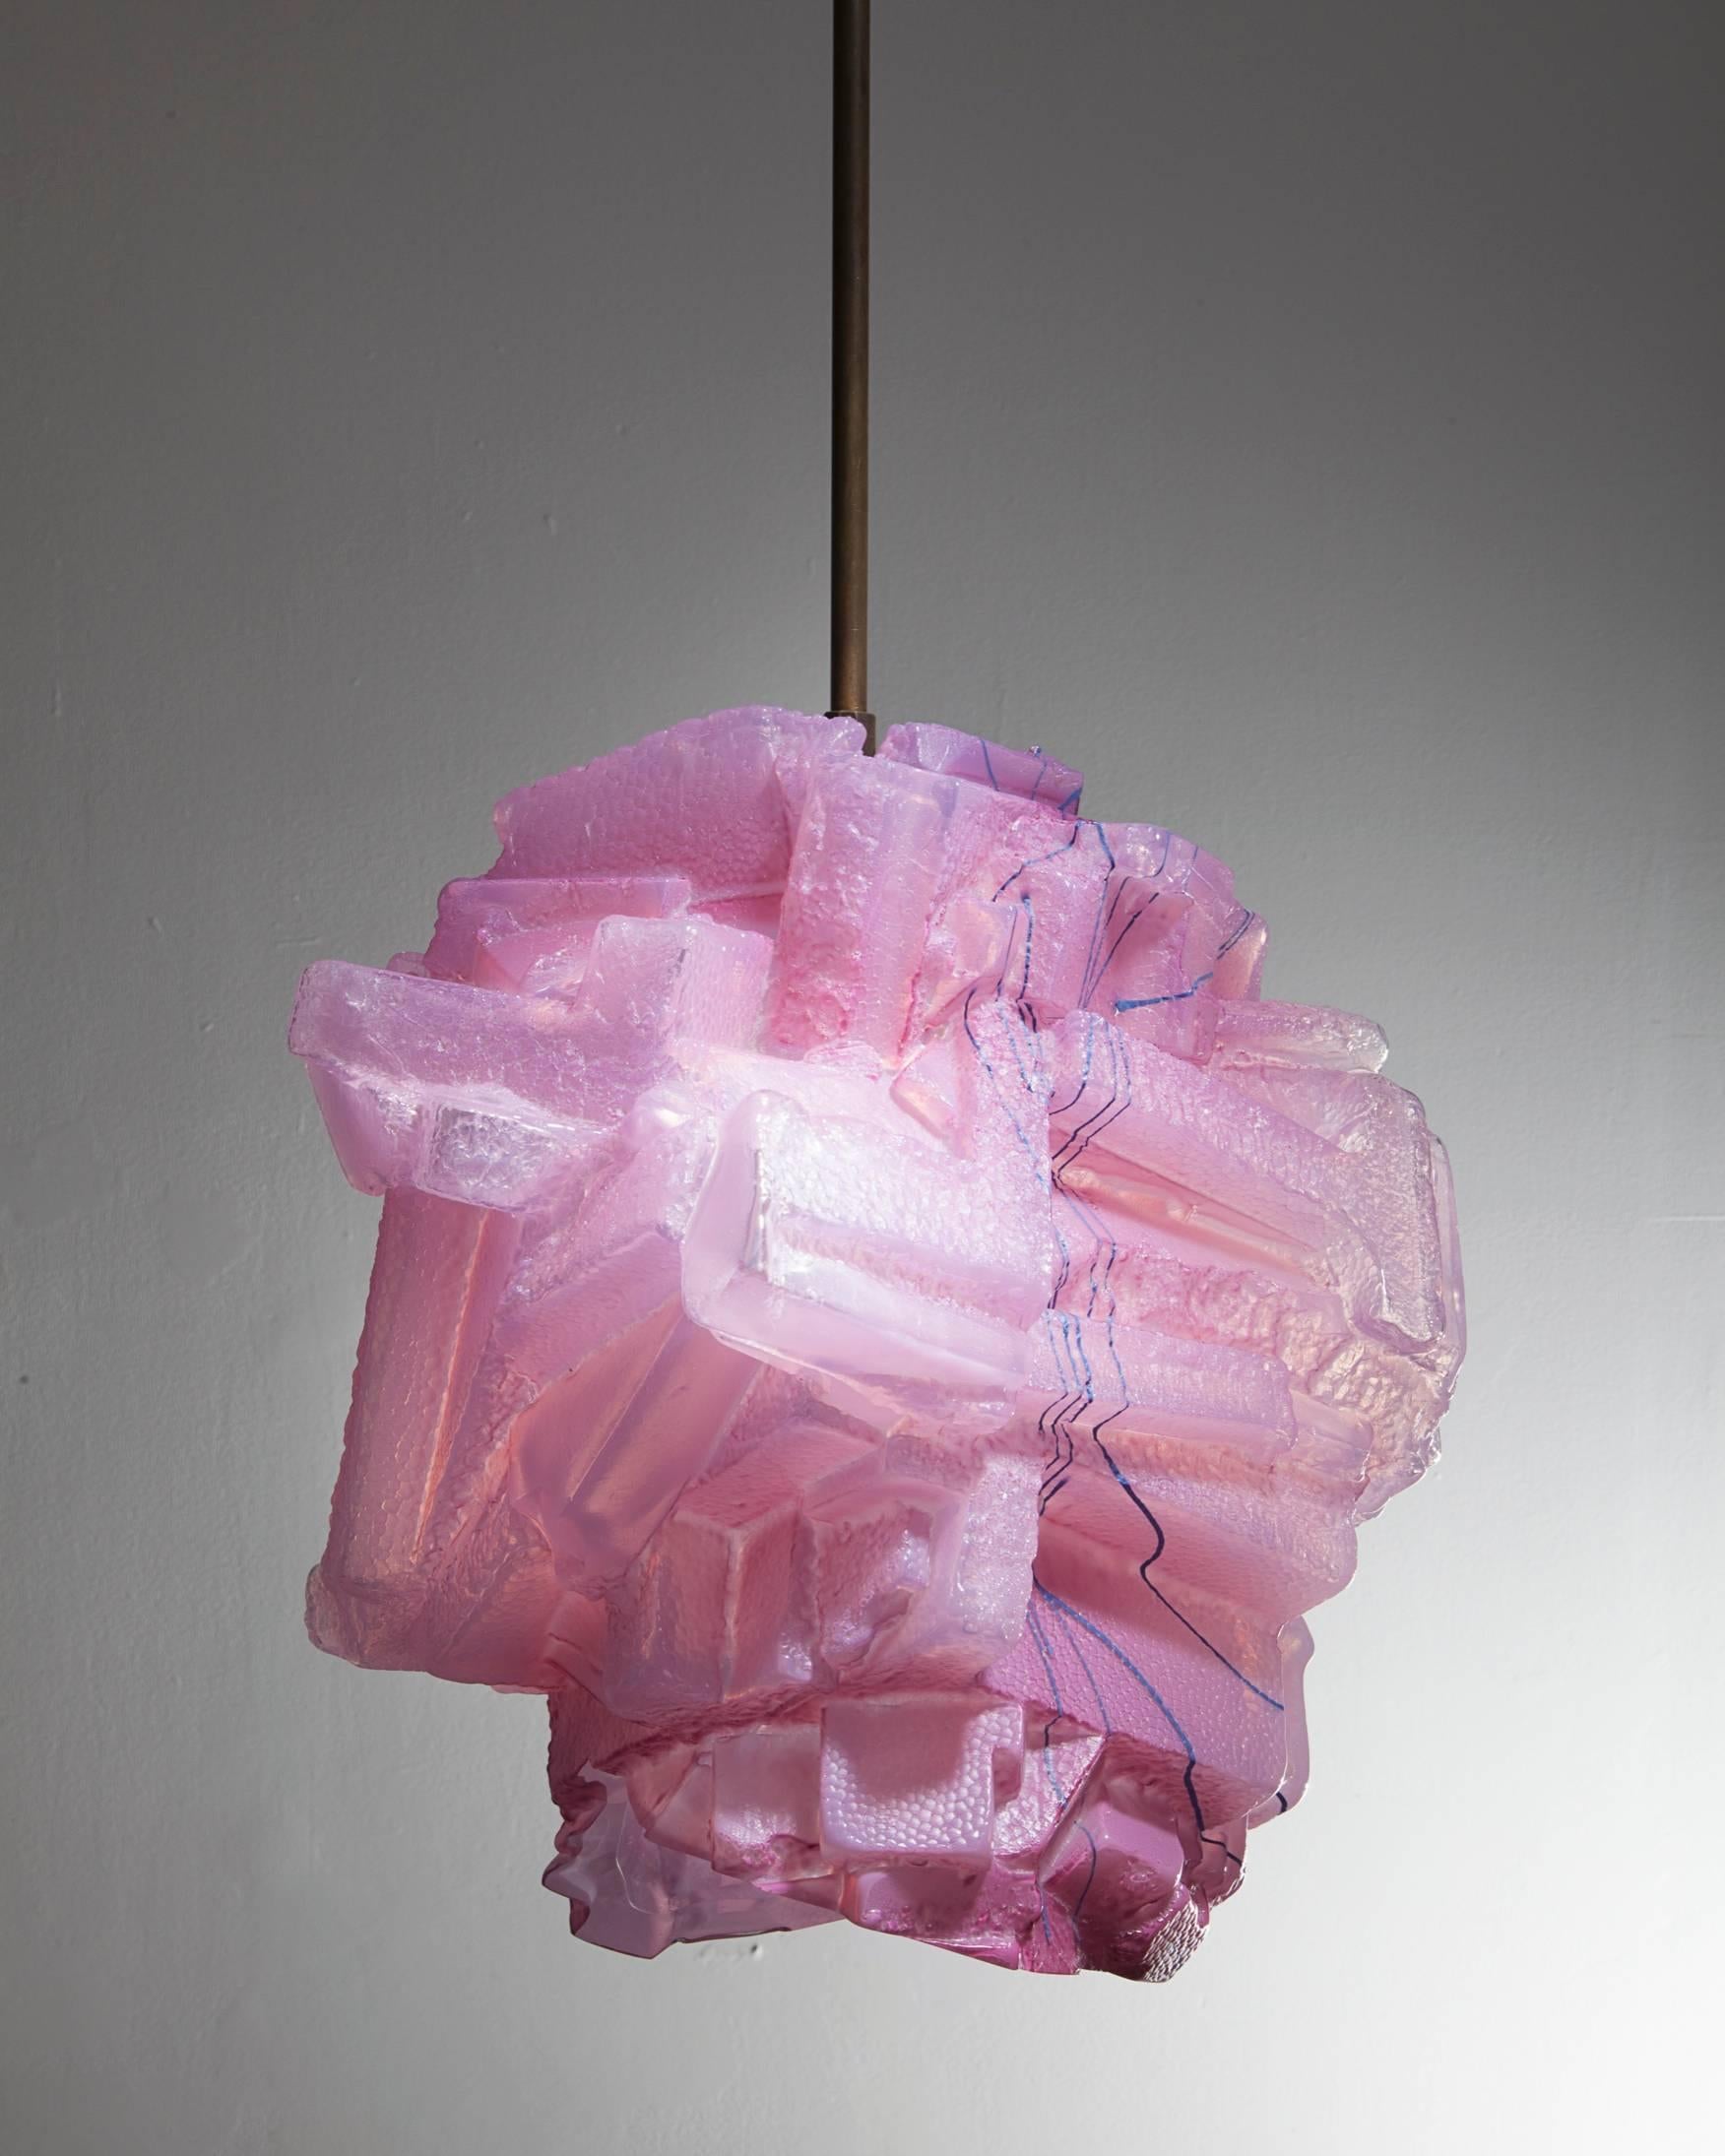 Contemporary Unique Assemblage Pendant Lamp in Handblown Glass by Thaddeus Wolfe, 2015